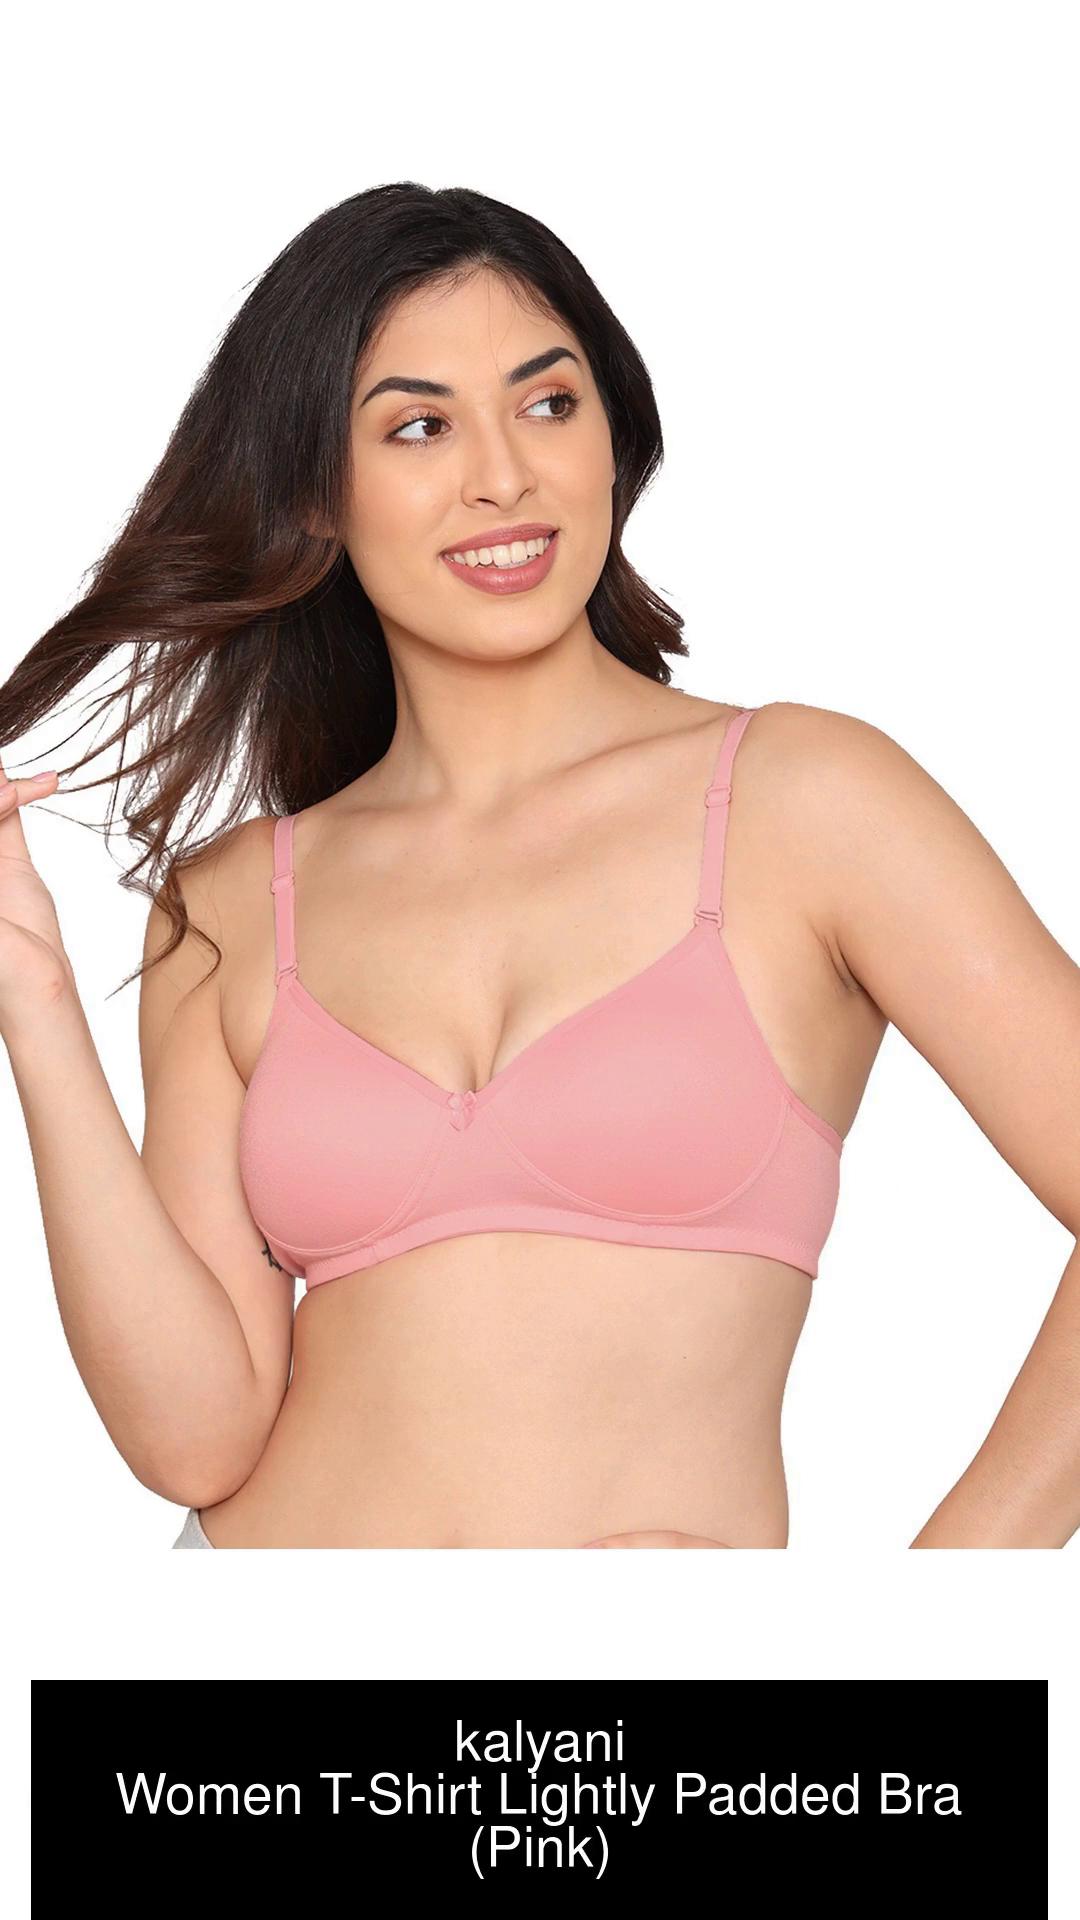 kalyani Padded Non-Wired T-shirt Bra 5018 Women T-Shirt Heavily Padded Bra  - Buy kalyani Padded Non-Wired T-shirt Bra 5018 Women T-Shirt Heavily Padded  Bra Online at Best Prices in India